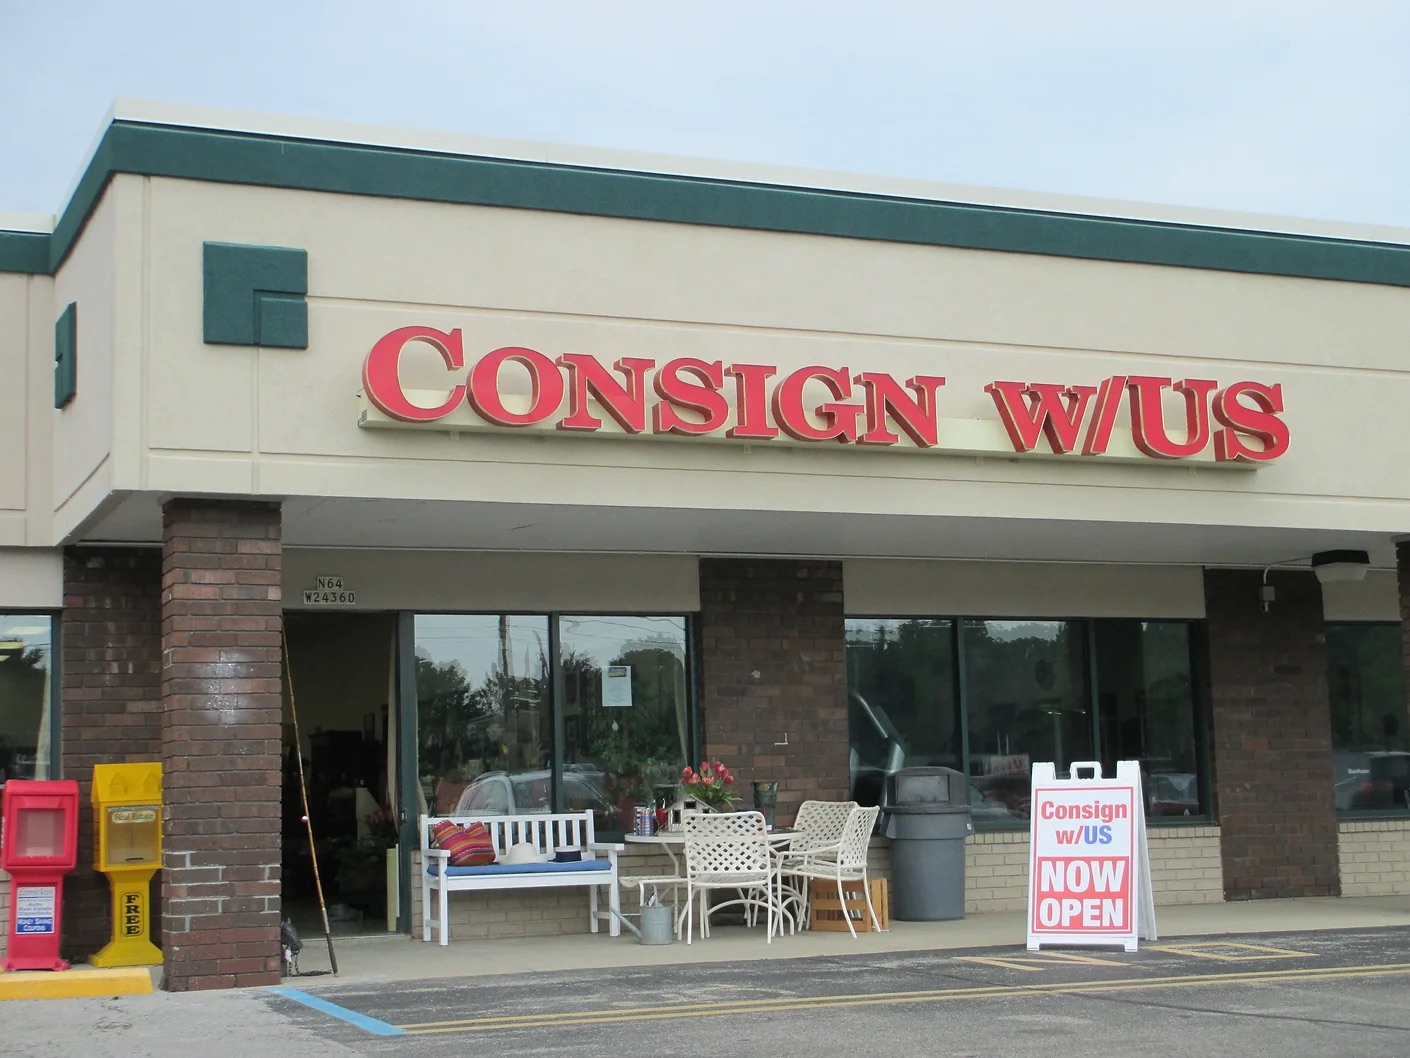 Consign With Us is a consignment shop located in Sussex, WI that offers high-quality furniture and home decor items at affordable prices.